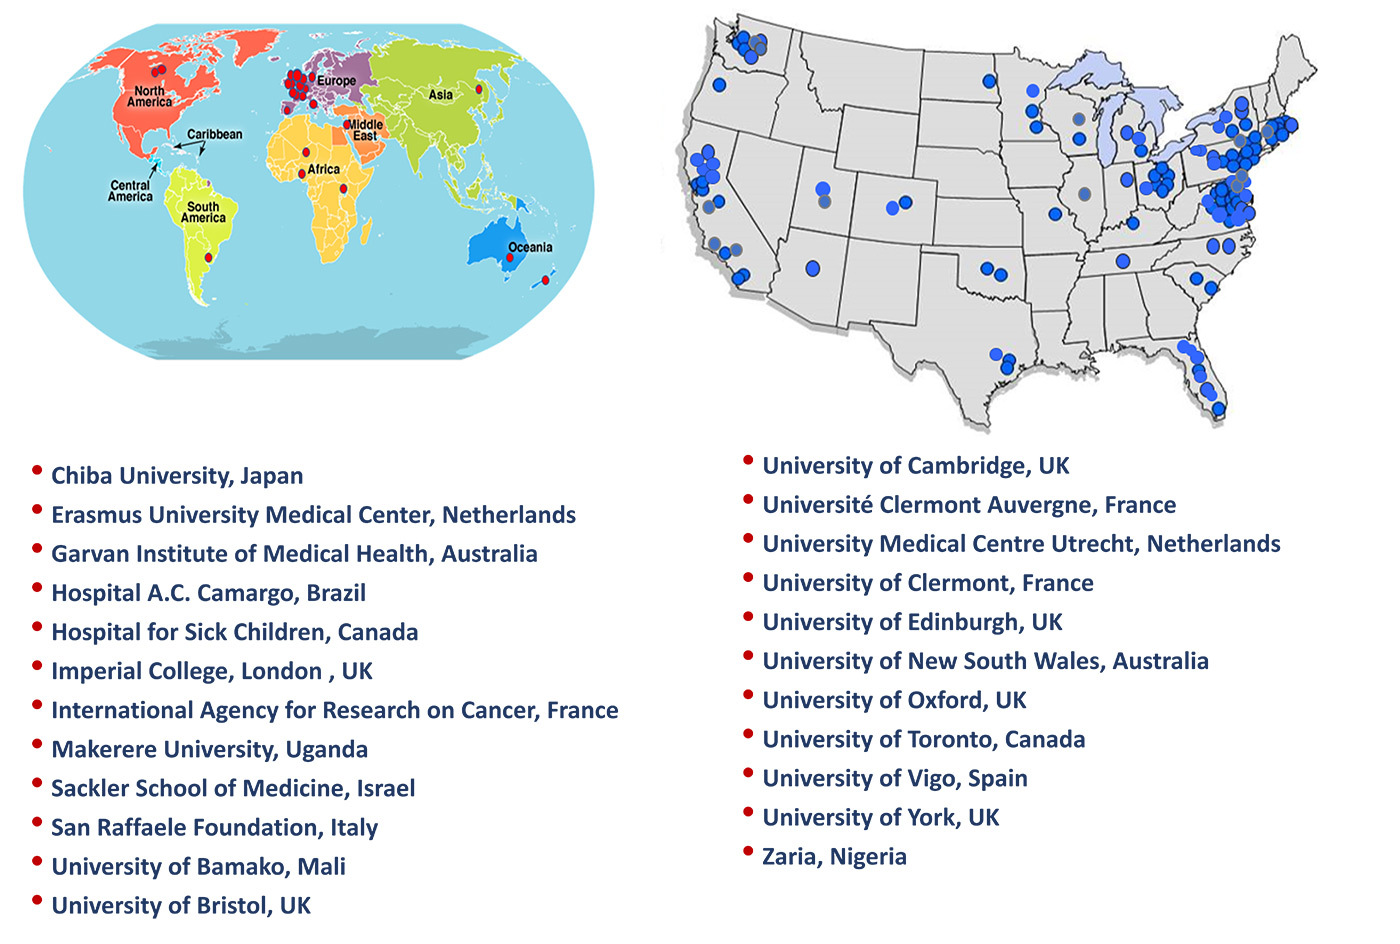 Image of the world map and US with awards marked as red dots. Locations listed below are Chiba University, Japan
Erasmus University Medical Center, Netherlands
Garvan Institute of Medical Health, Australia 
Hospital A.C. Camargo, Brazil 
Hospital for Sick Children, Canada
Imperial College, London , UK
International Agency for Research on Cancer, France
Makerere University, Uganda 
Sackler School of Medicine, Israel
San Raffaele Foundation, Italy
University of Bamako, Mali
University of Bristol, UK
University of Cambridge, UK
Université Clermont Auvergne, France
University Medical Centre Utrecht, Netherlands
University of Clermont, France
University of Edinburgh, UK
University of New South Wales, Australia
University of Oxford, UK 
University of Toronto, Canada 
University of Vigo, Spain
University of York, UK
Zaria, Nigeria